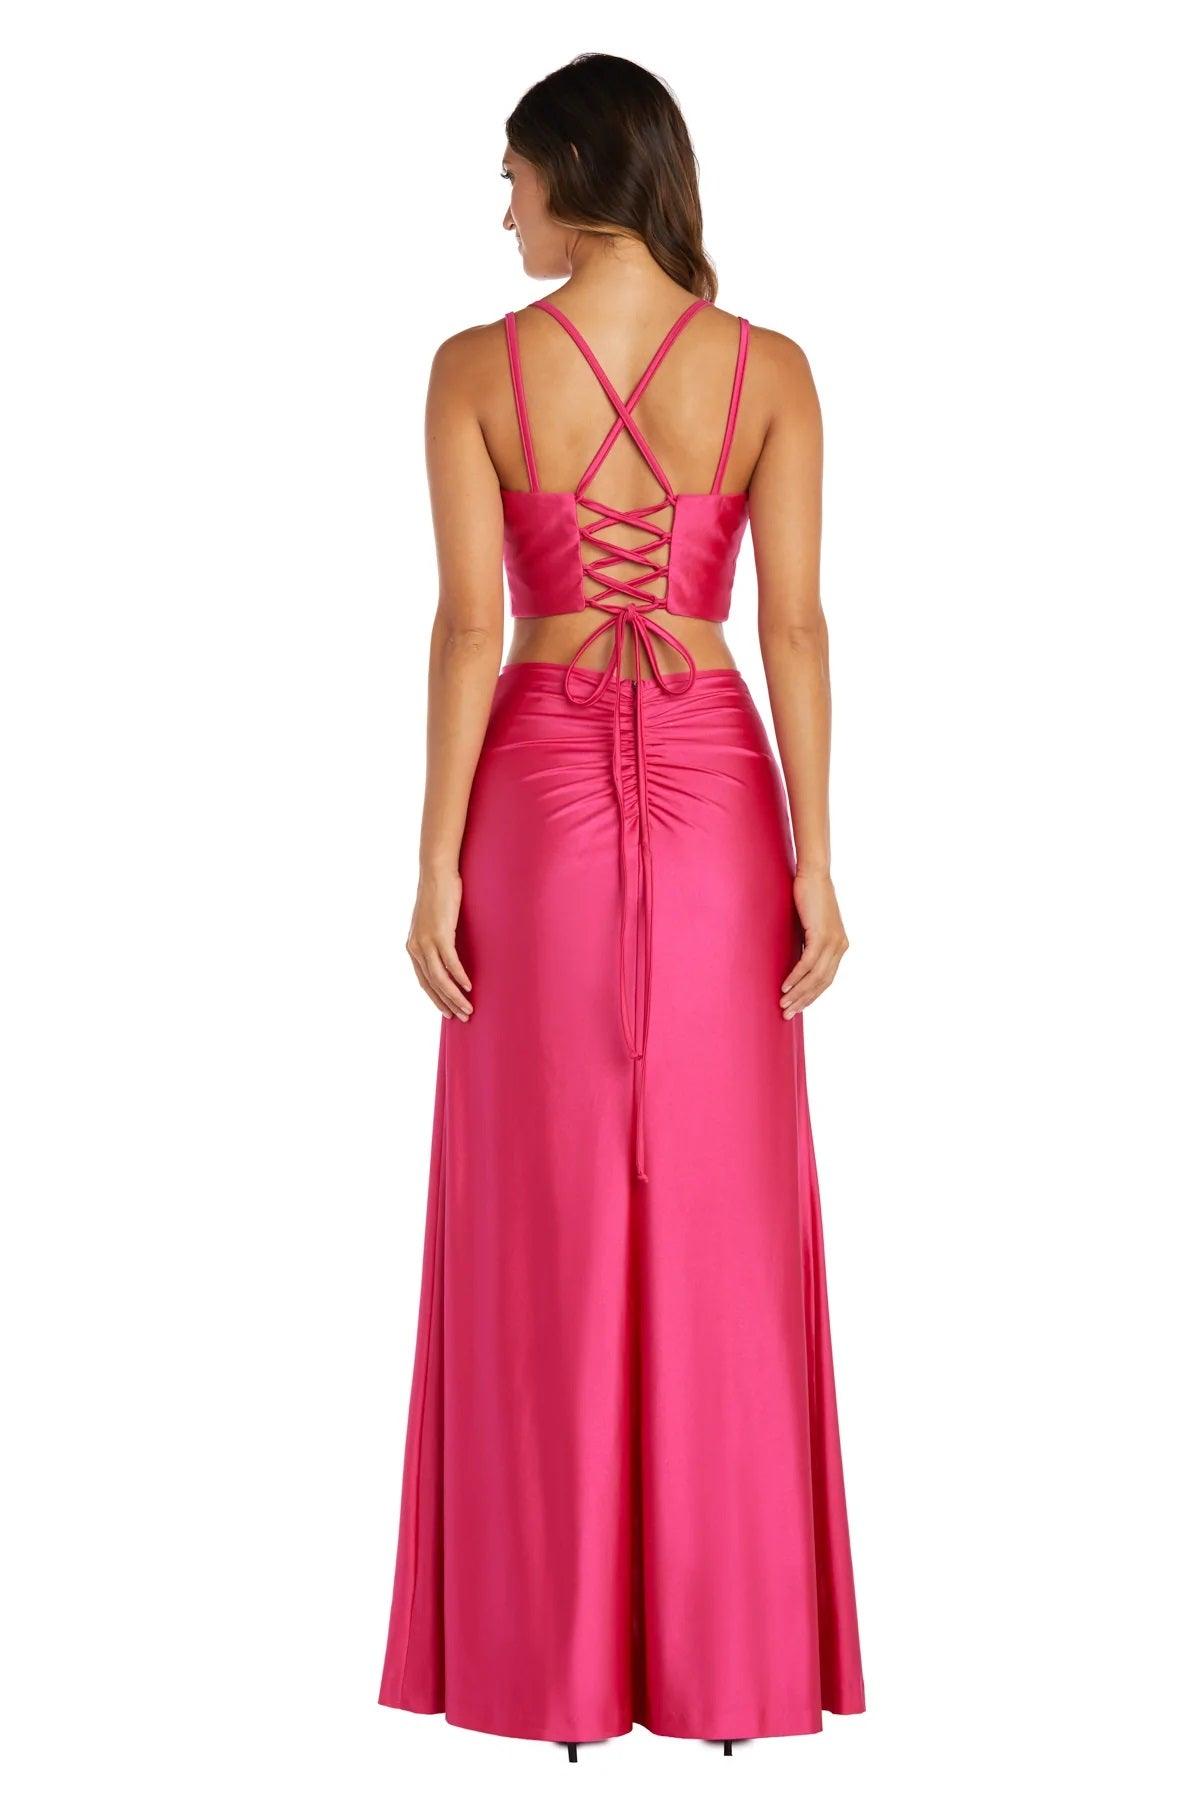 Morgan & Co Long Two Piece Prom Formal Dress 13030 - The Dress Outlet